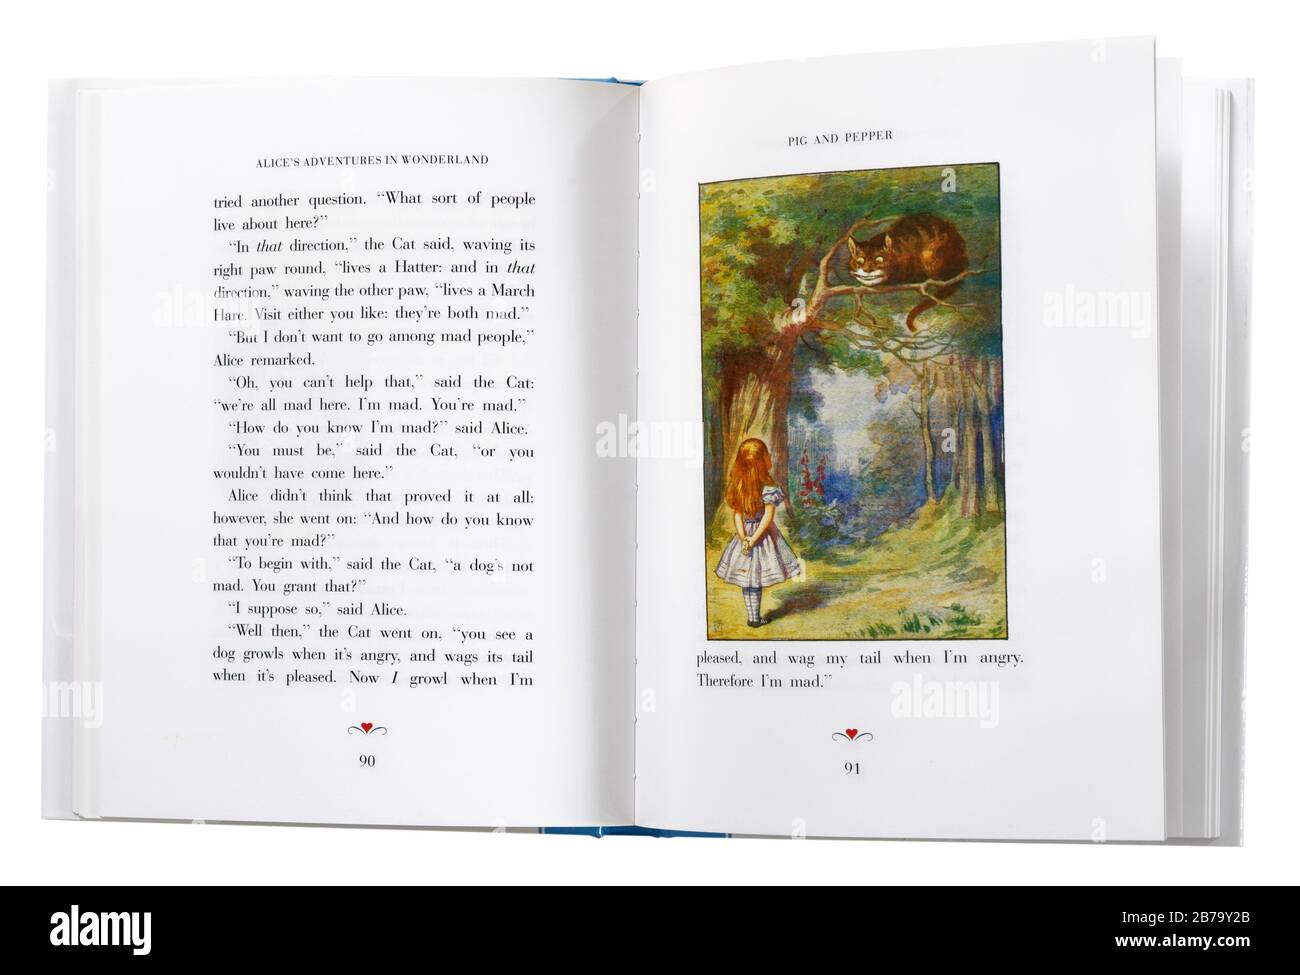 Alice in Wonderland by Lewis Carroll, open at an illustration of Alice and the Cheshire Cat. Stock Photo